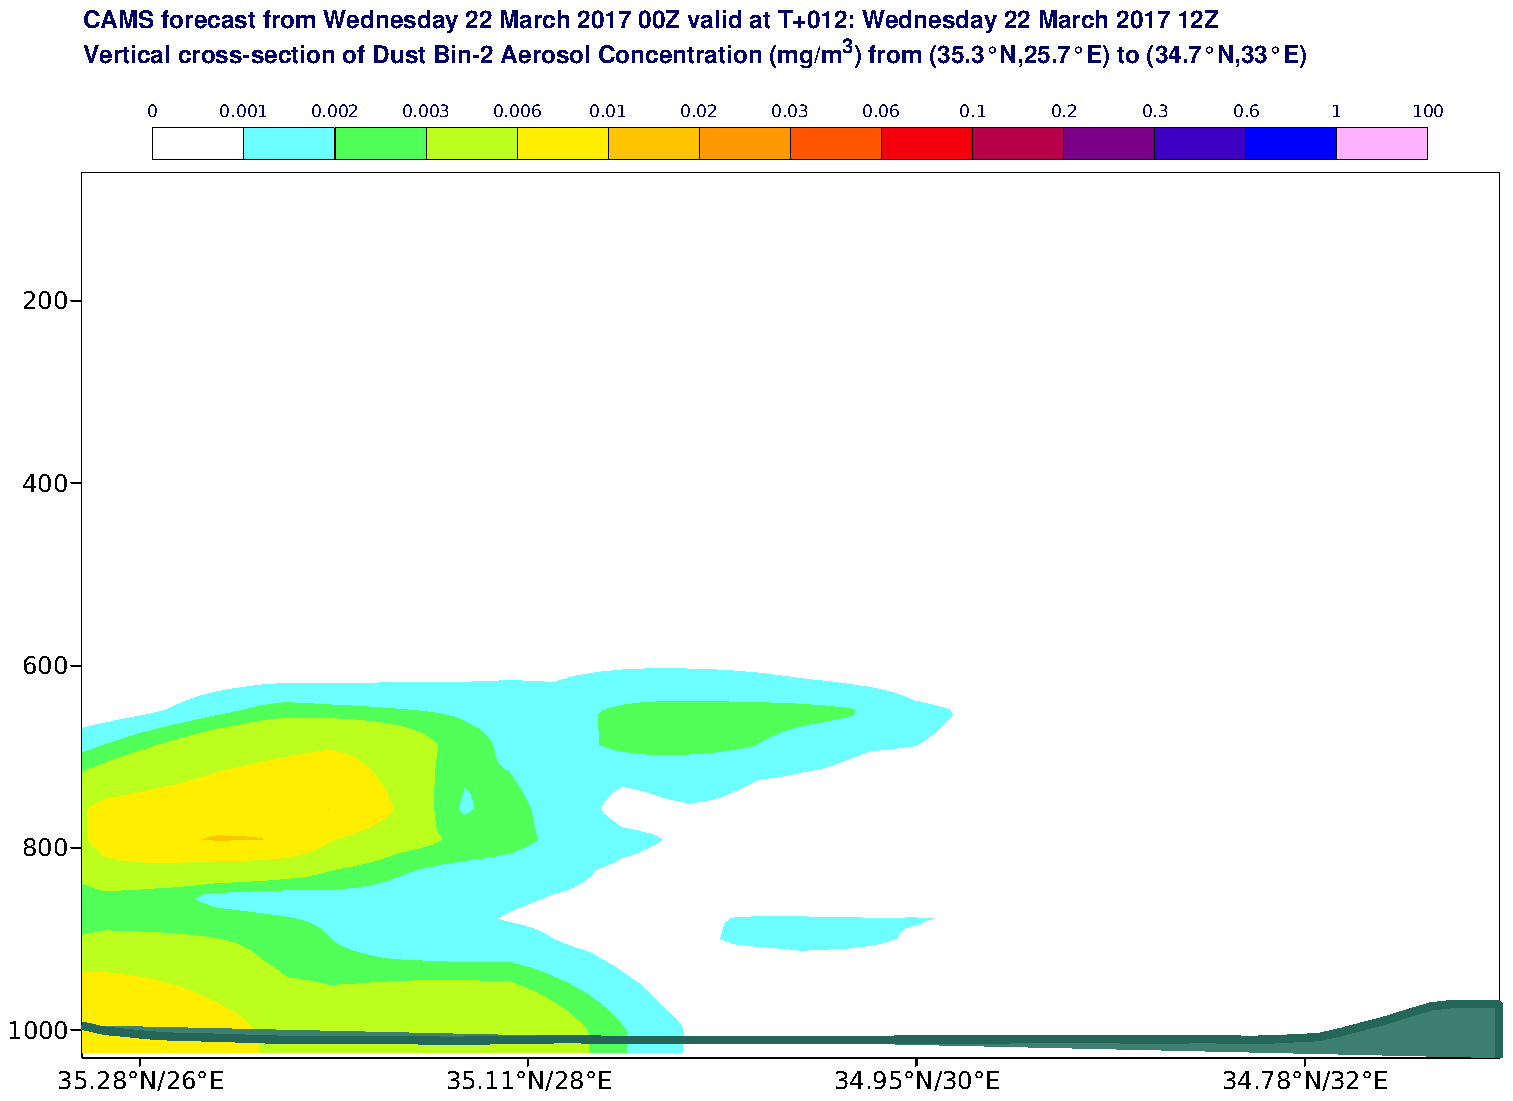 Vertical cross-section of Dust Bin-2 Aerosol Concentration (mg/m3) valid at T12 - 2017-03-22 12:00